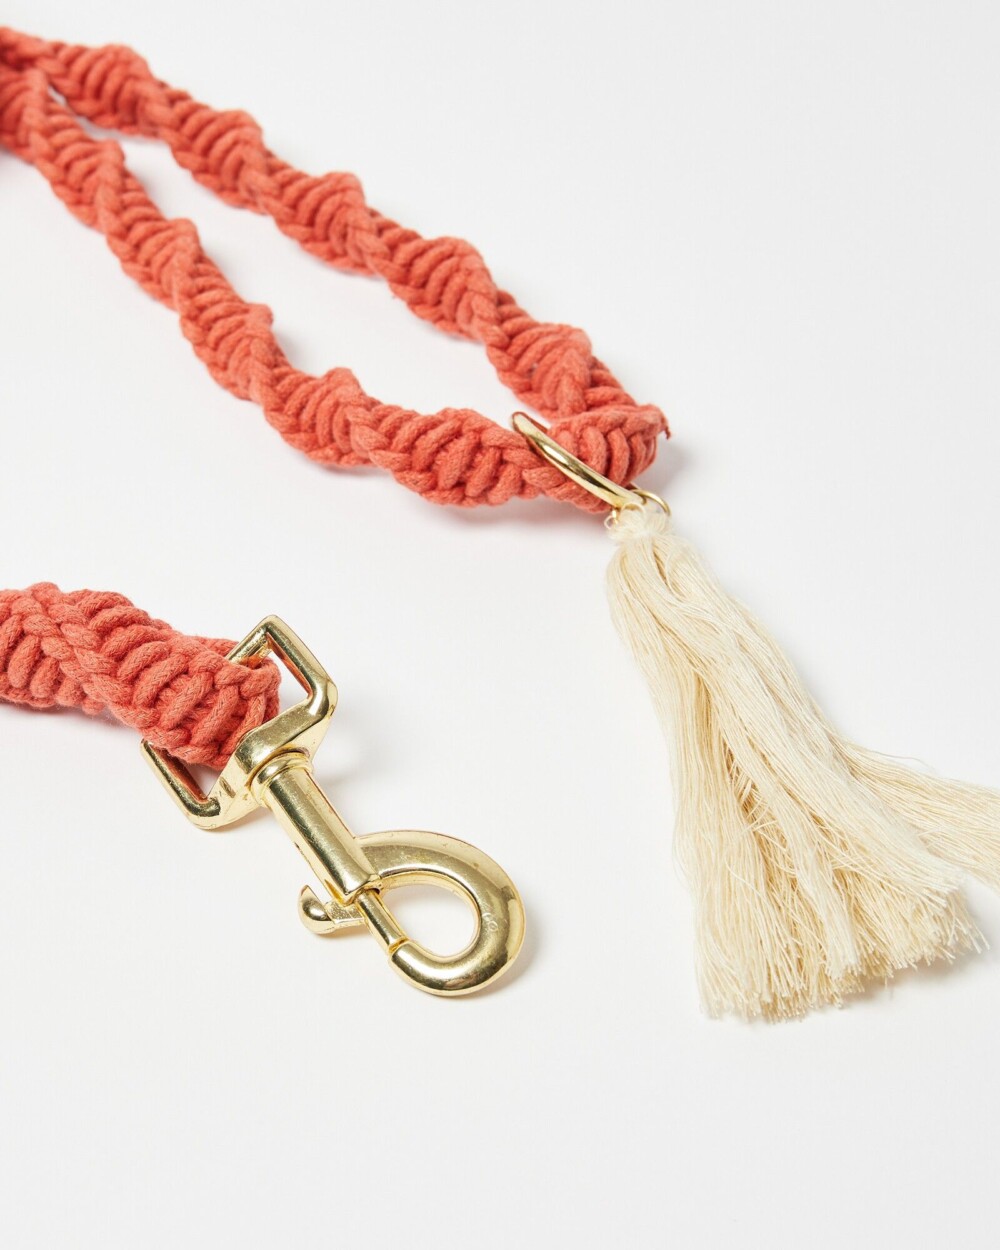 a pinkish, sunset coloured twister rope lead with a tassel and gold detail glasp, shown against a white background